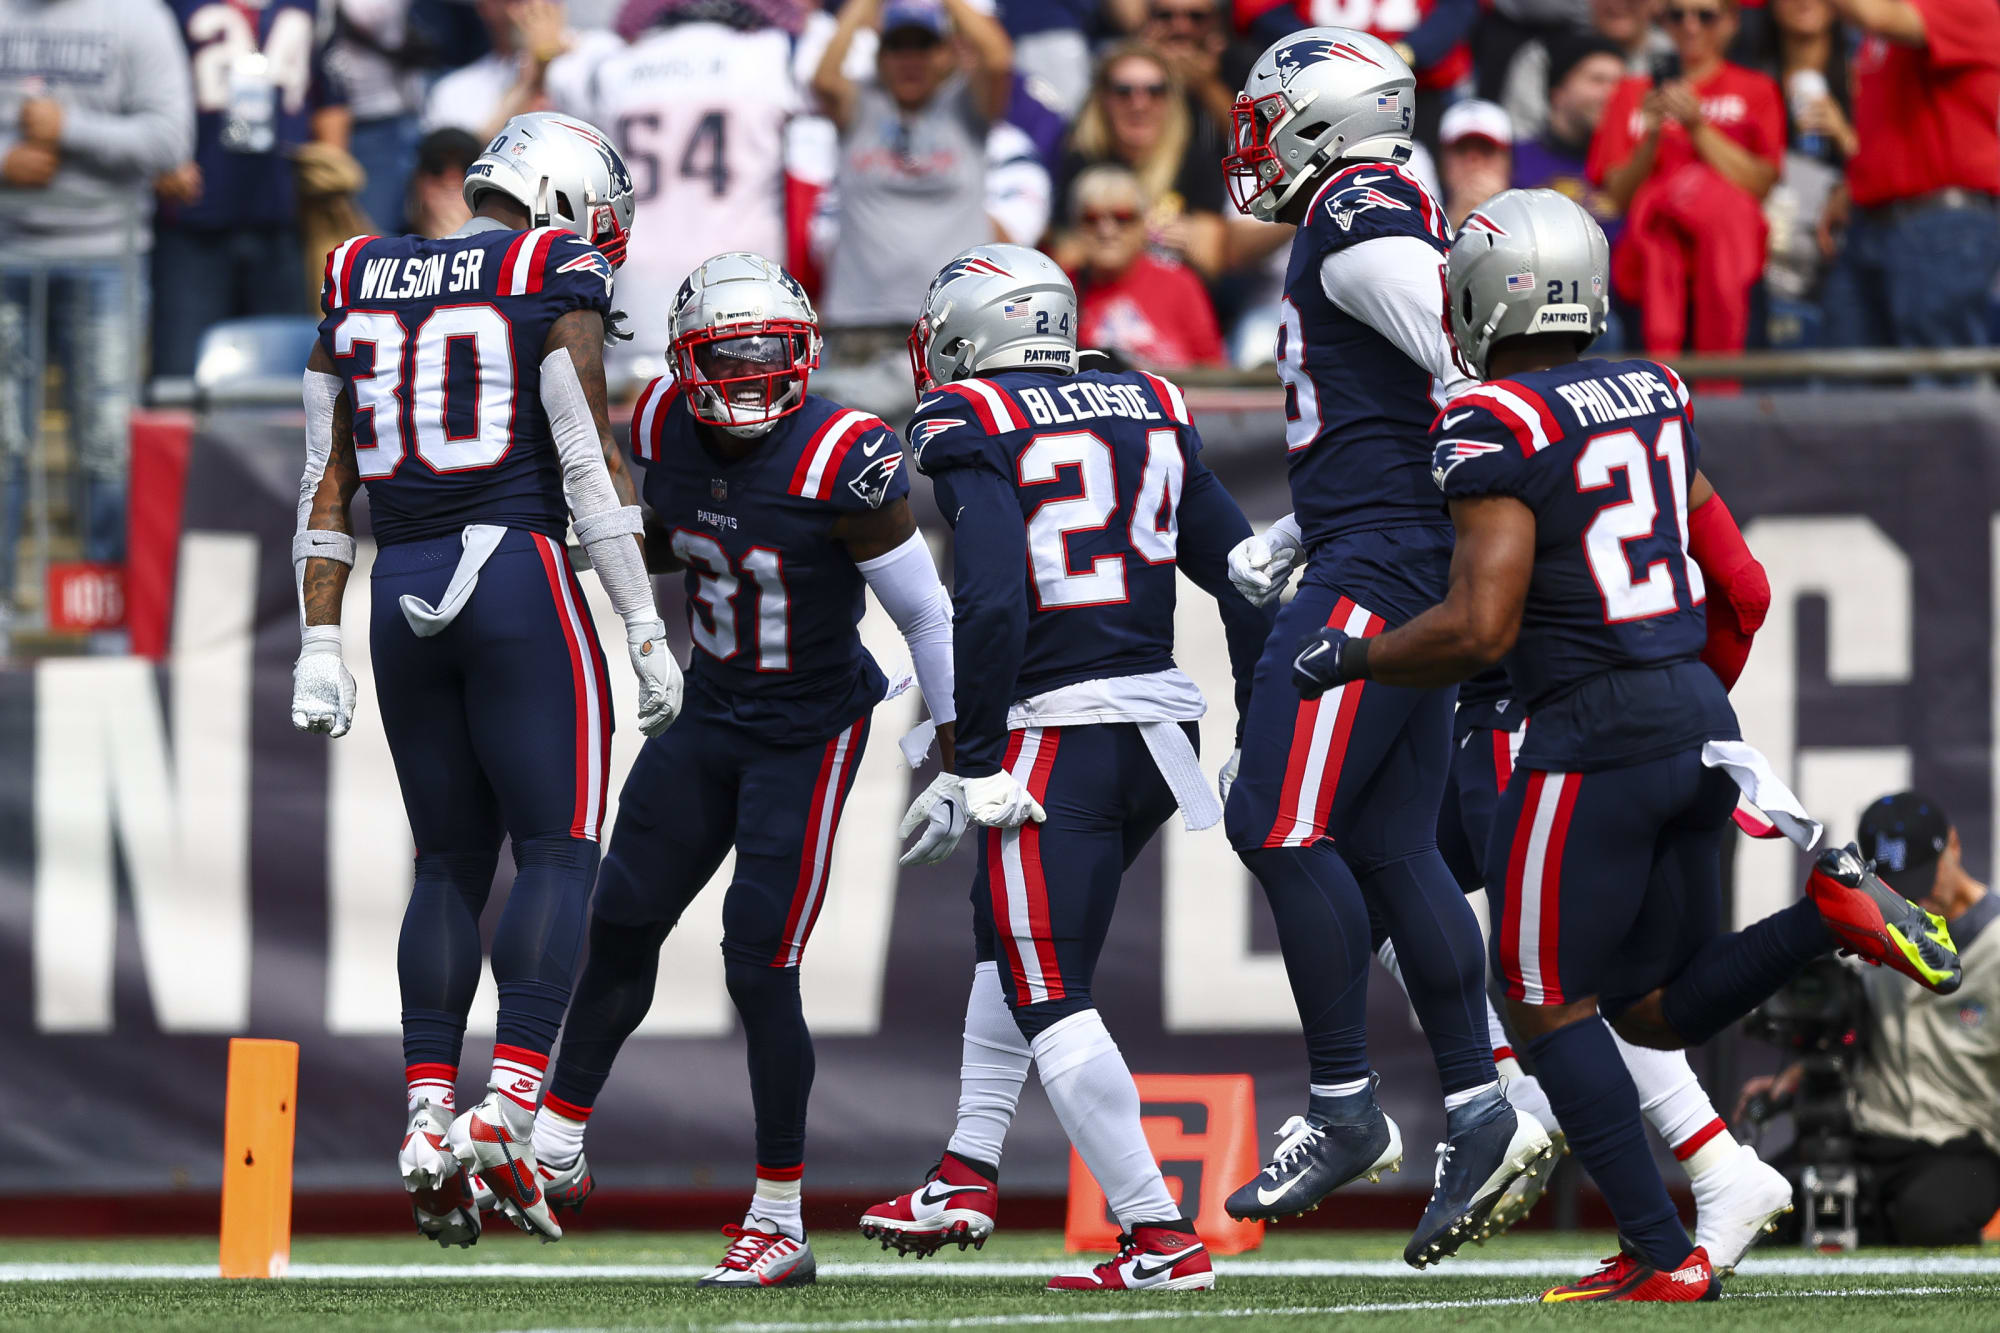 Do the New England Patriots have the best secondary in the NFL?